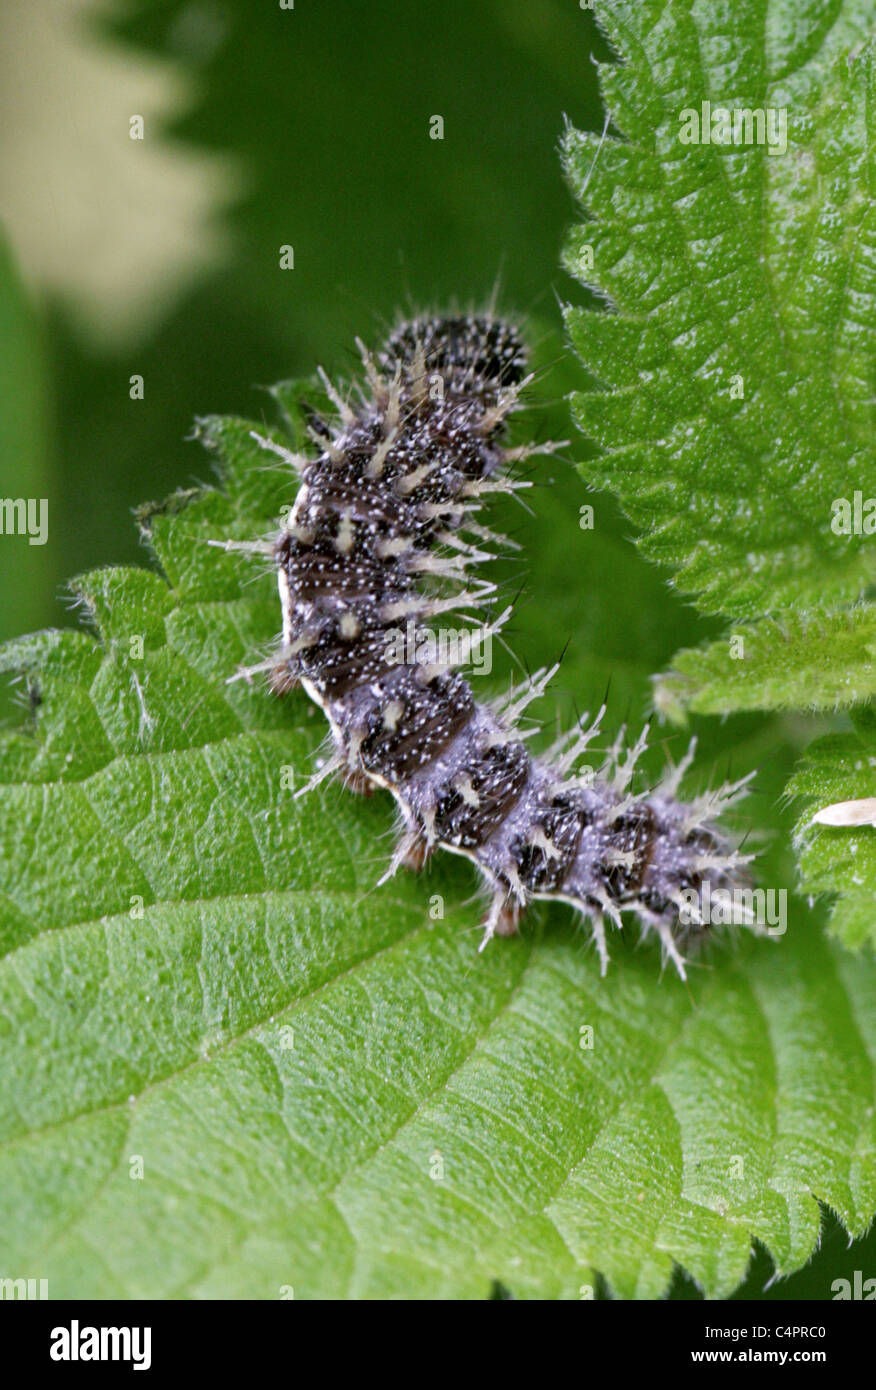 Dipinto di Lady Butterfly Larva, Vanessa cardui, Nymphalidae, Lepidoptera Foto Stock